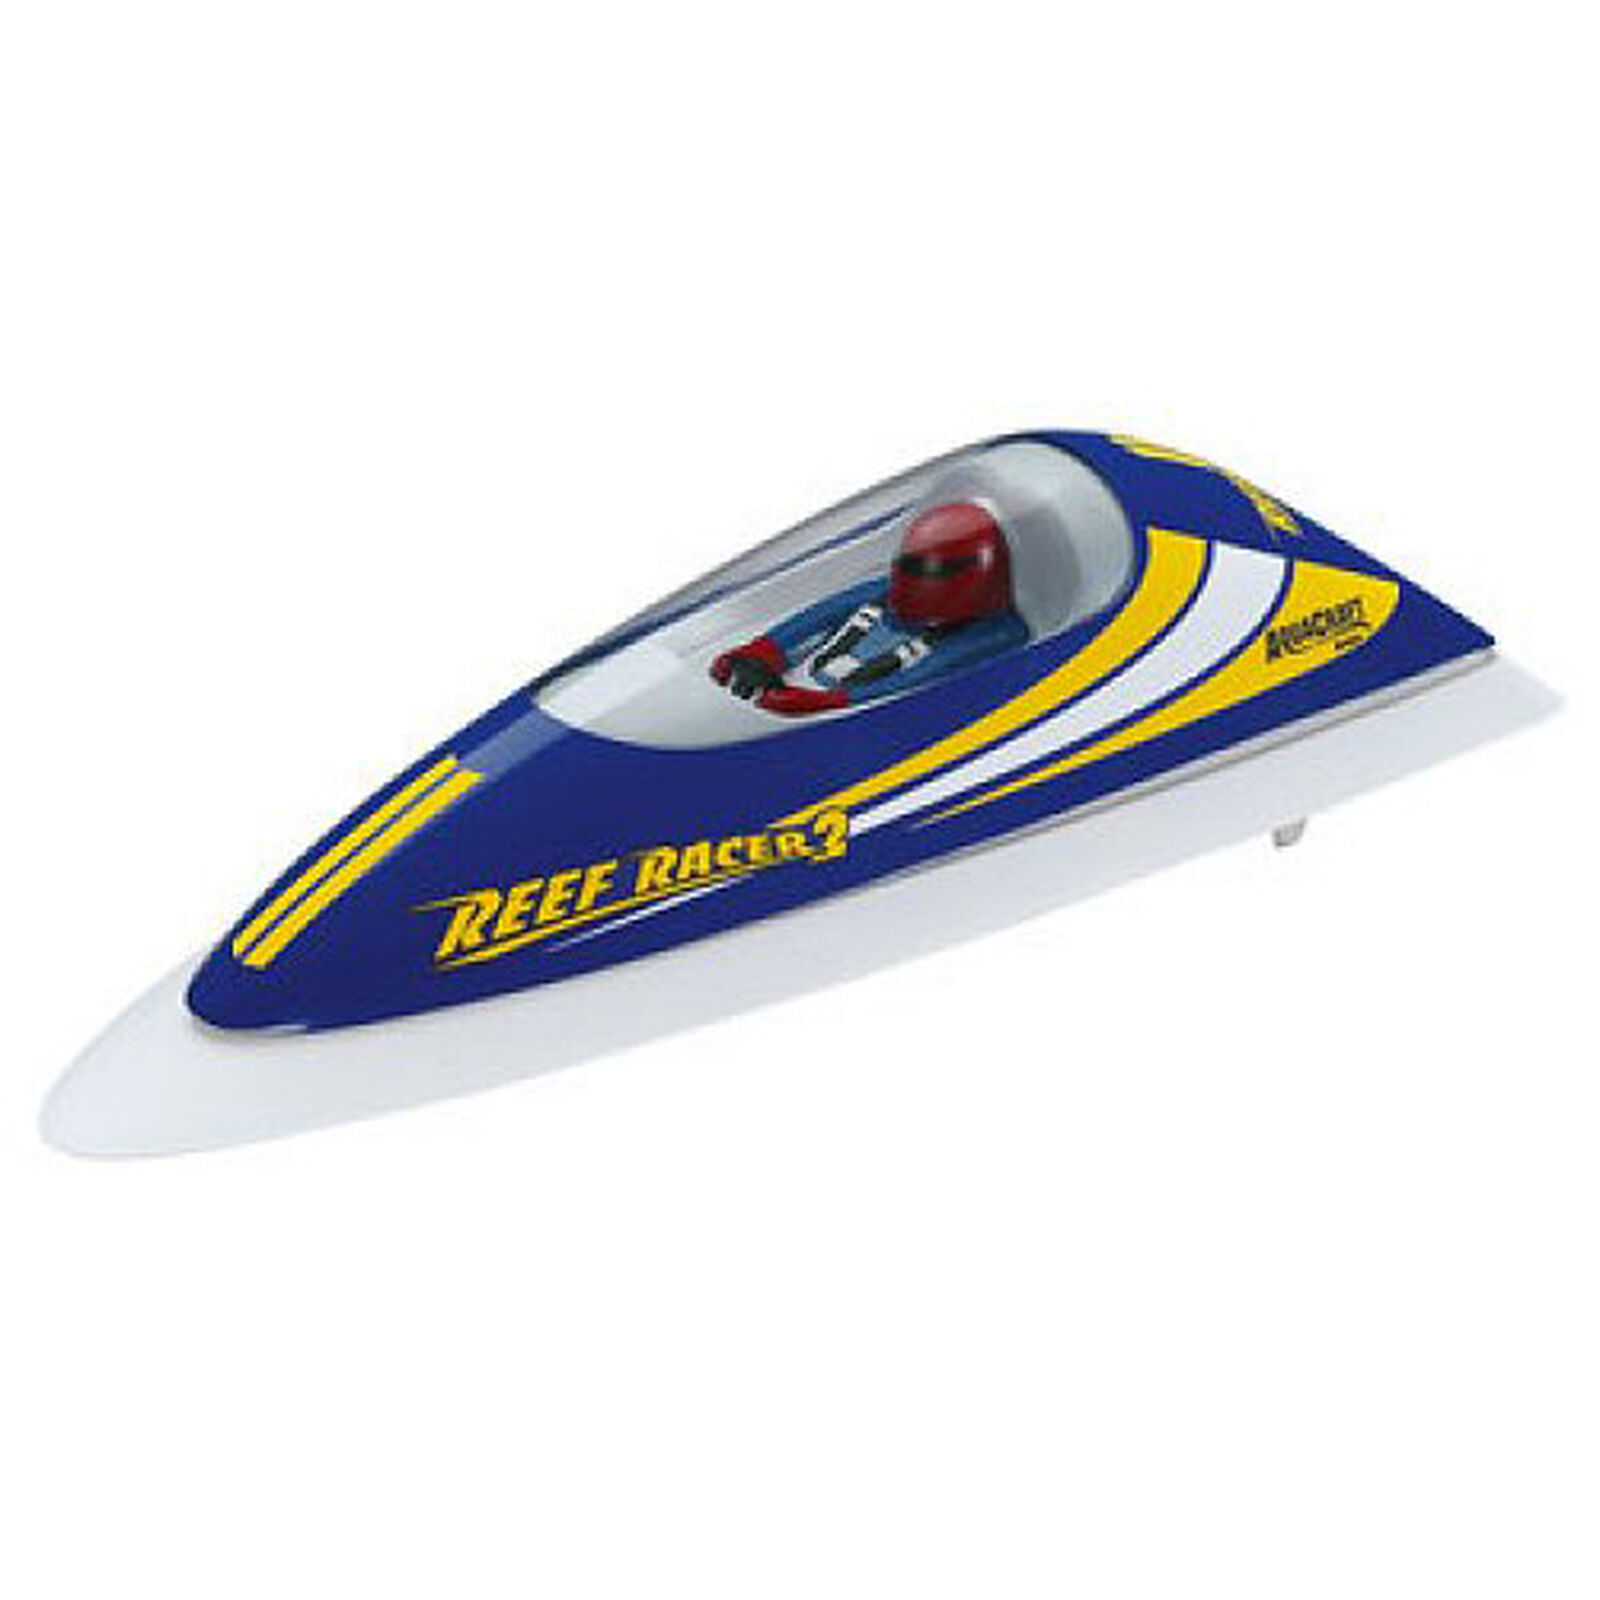 Reef Racer 2 RTR Boat Blue A2